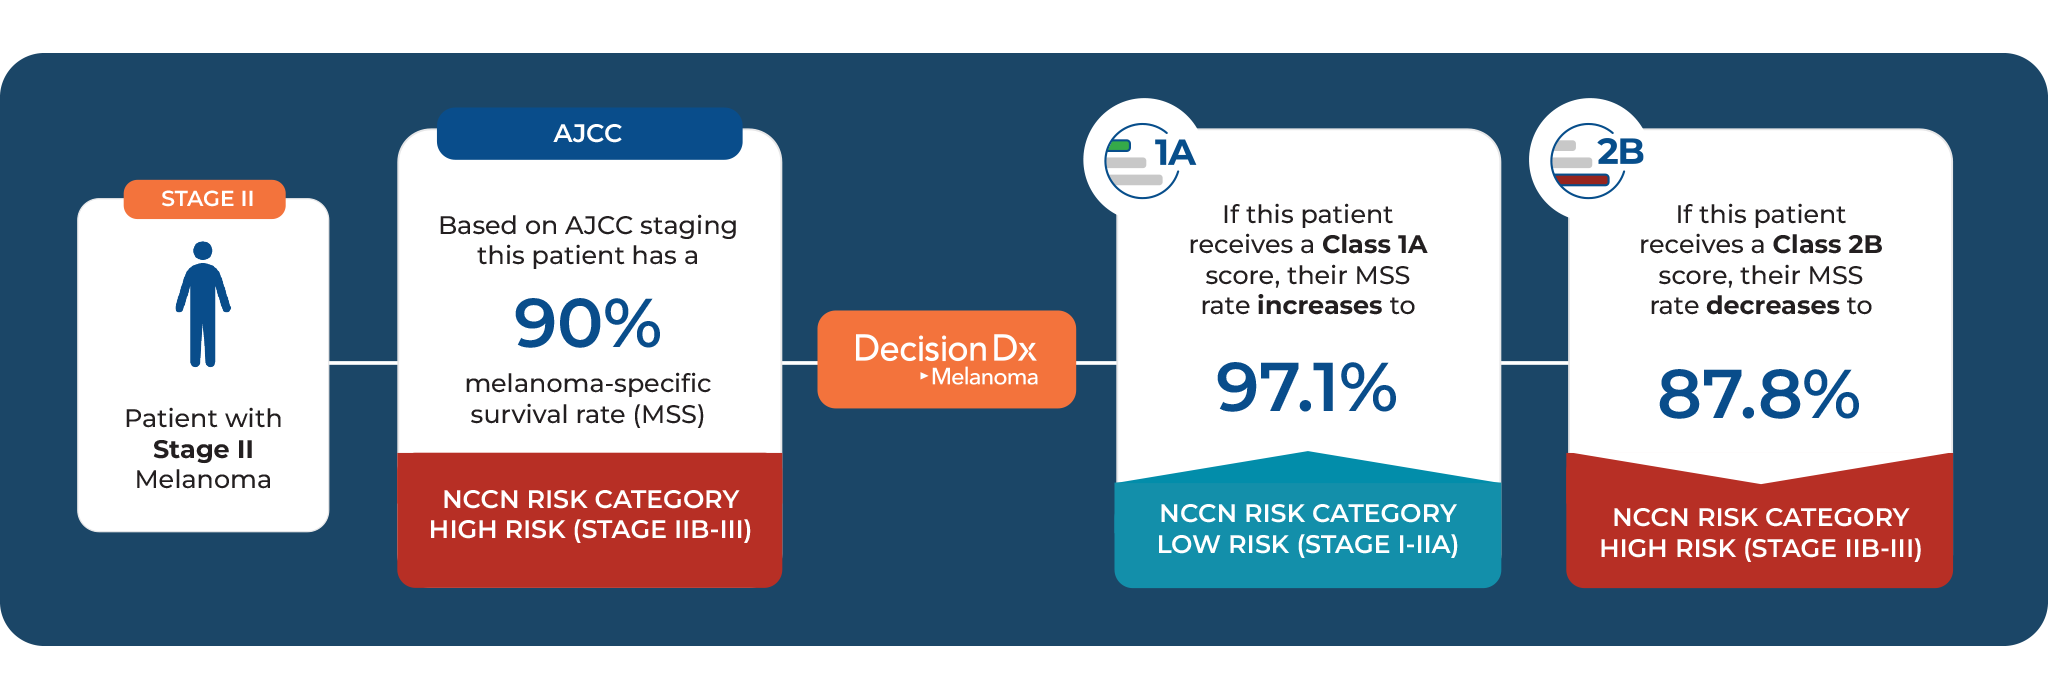 AJCC staging alone suggests a 90% survival rate for Stage II melanoma. Combined with DecisionDx class 1A results, the survival rate is 97.1%. Combine with DecisionDx class 2B results, the survival rate is 87.8%.